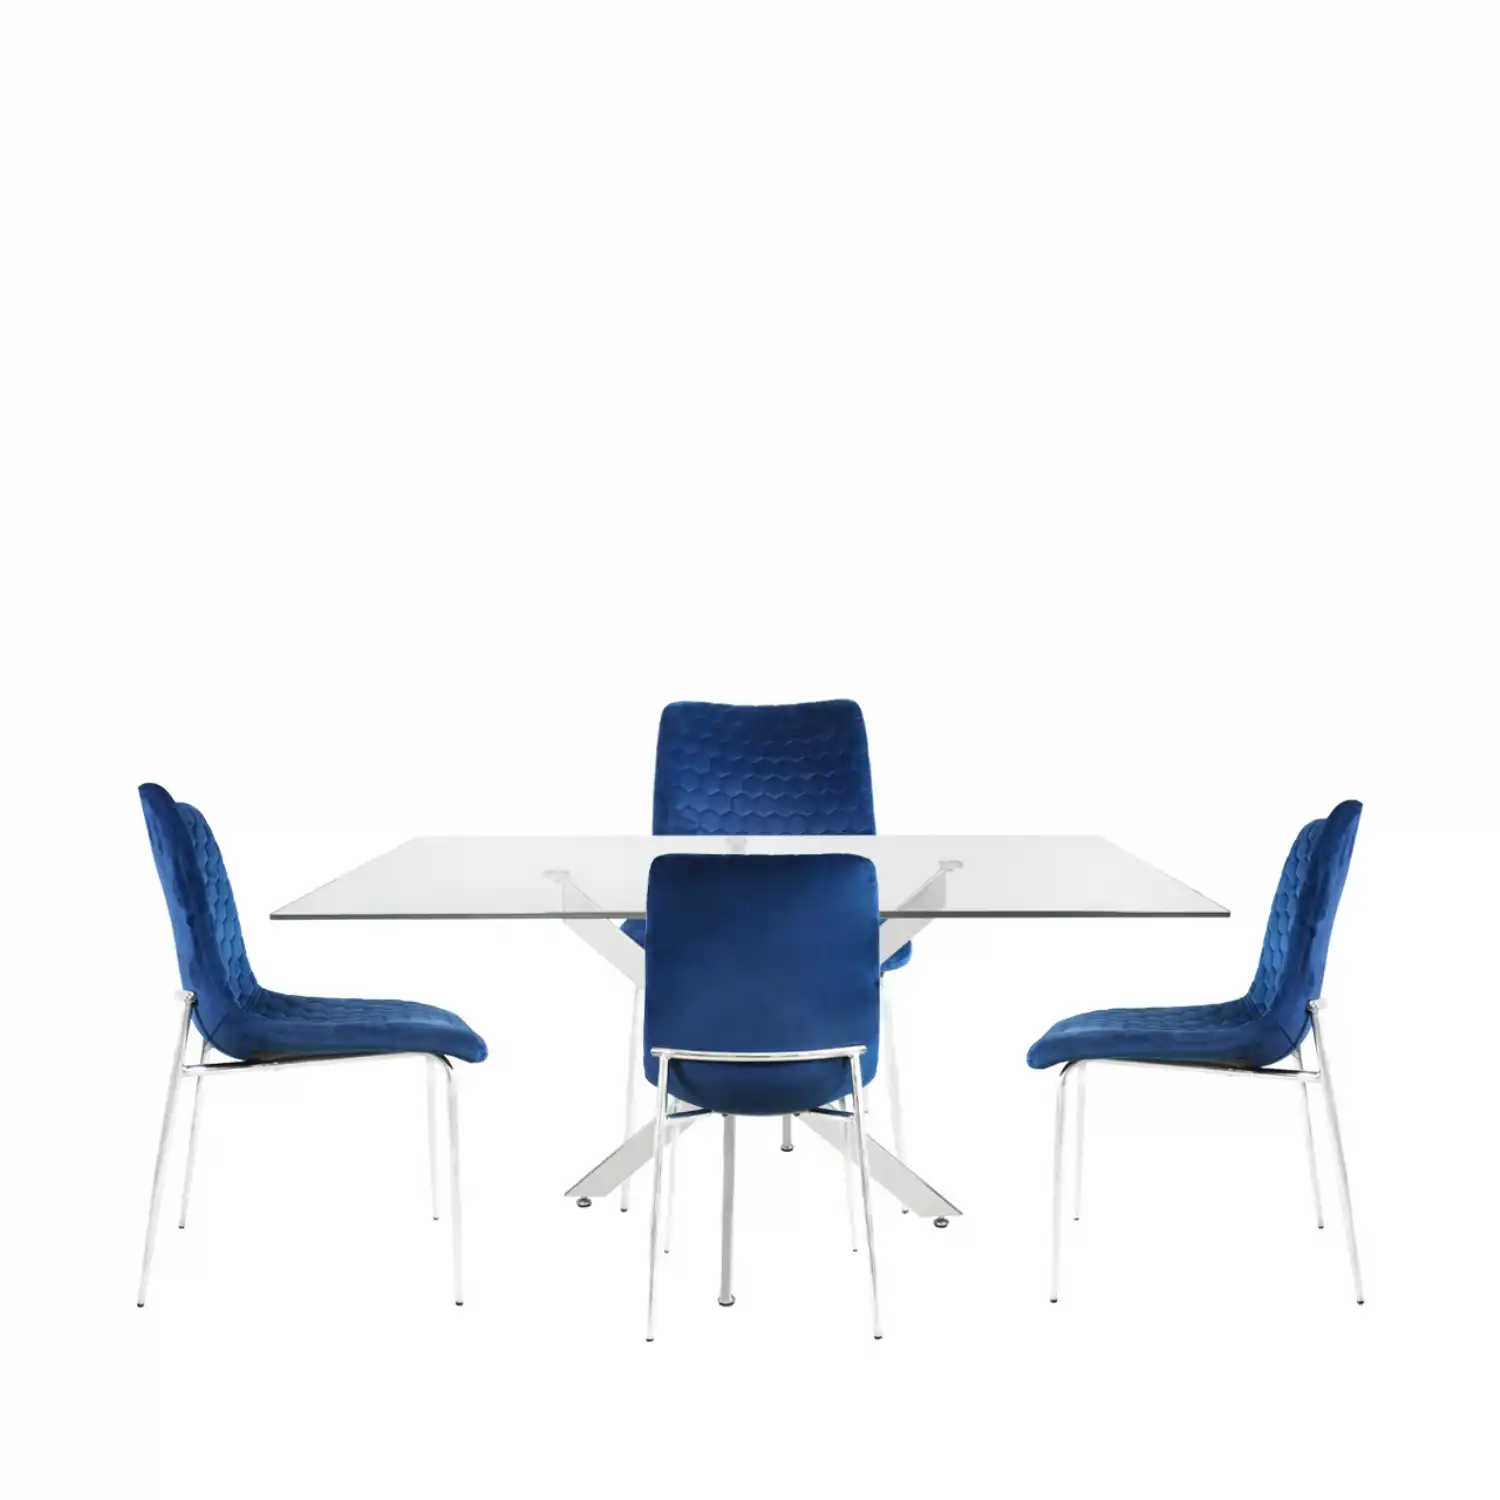 Nova 160cm Rectangular Dining Table And 4 Blue Chairs